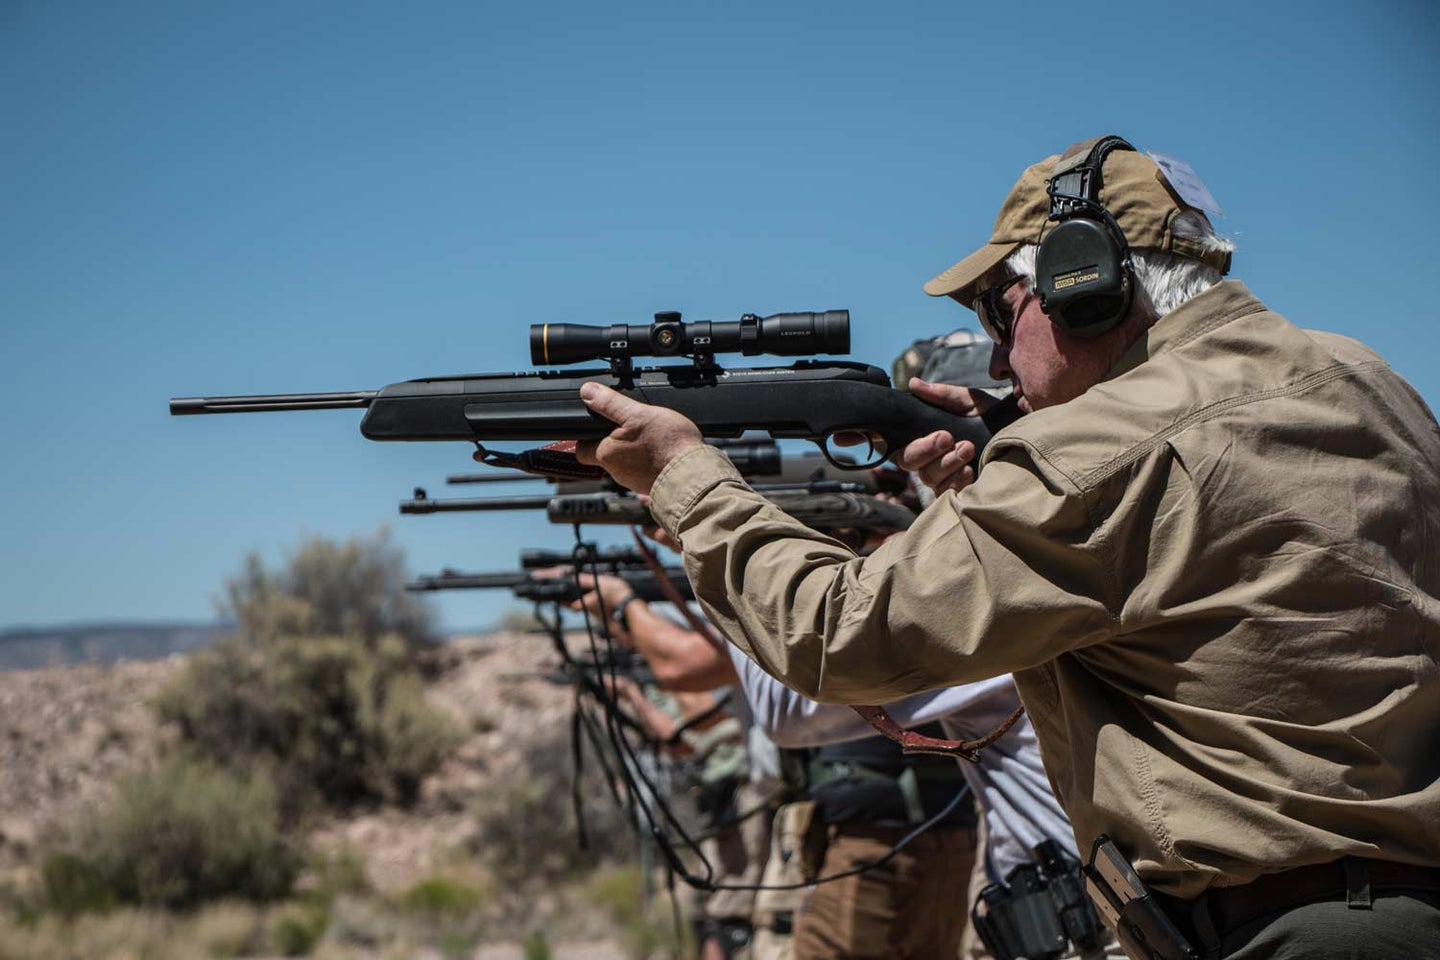 A line of men aim scout rifles at a shooting range.